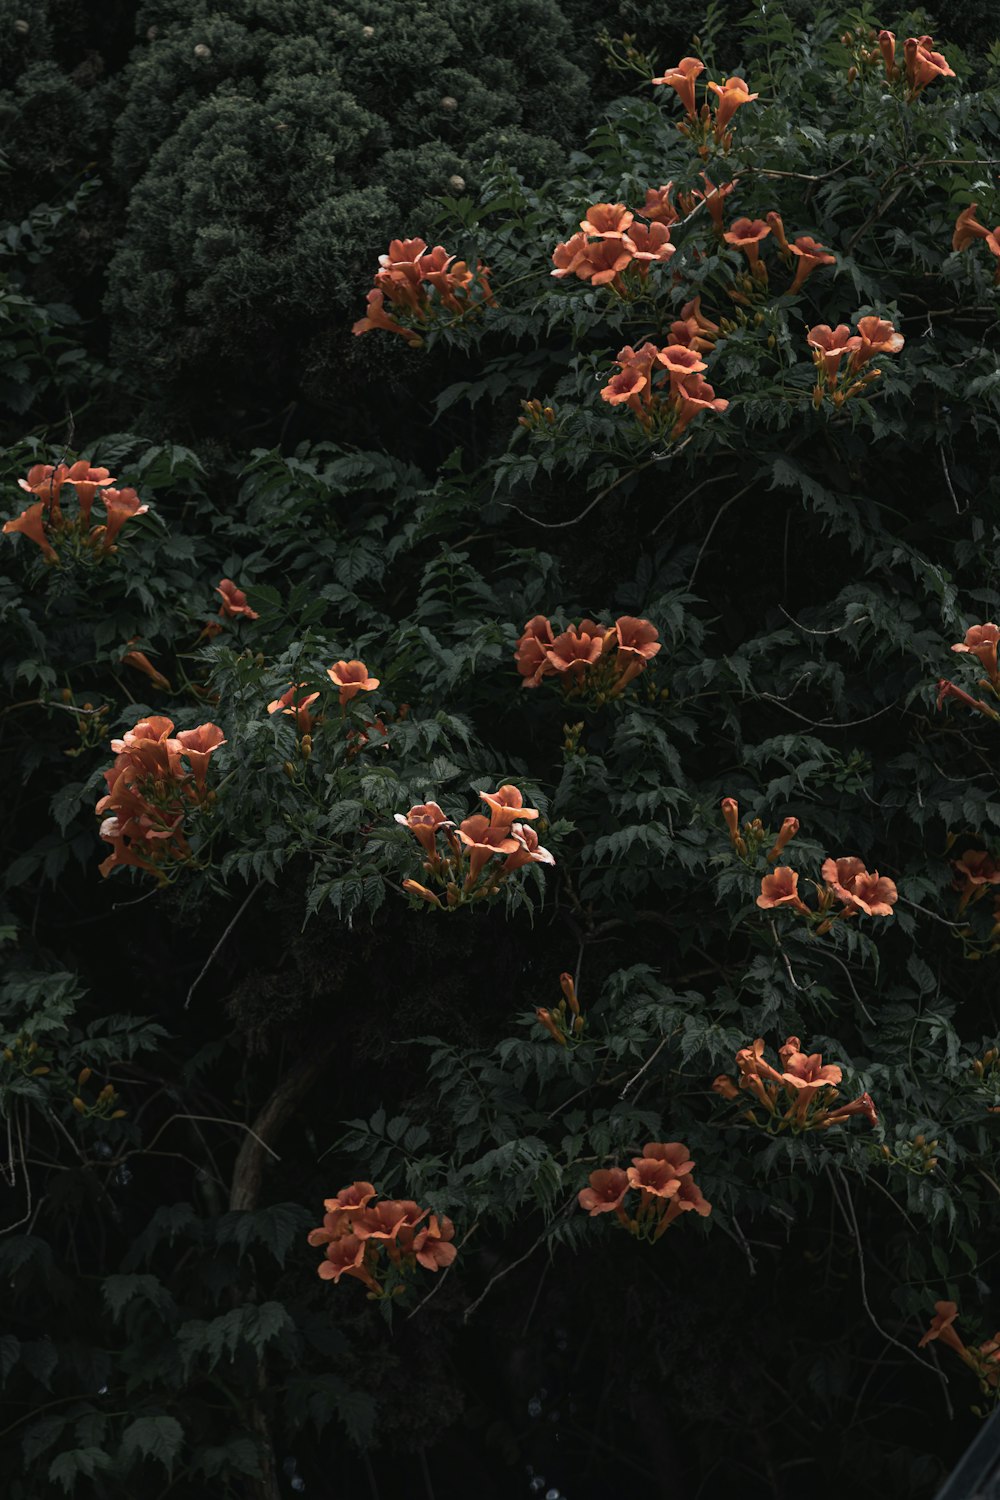 a tree with orange flowers in the foreground